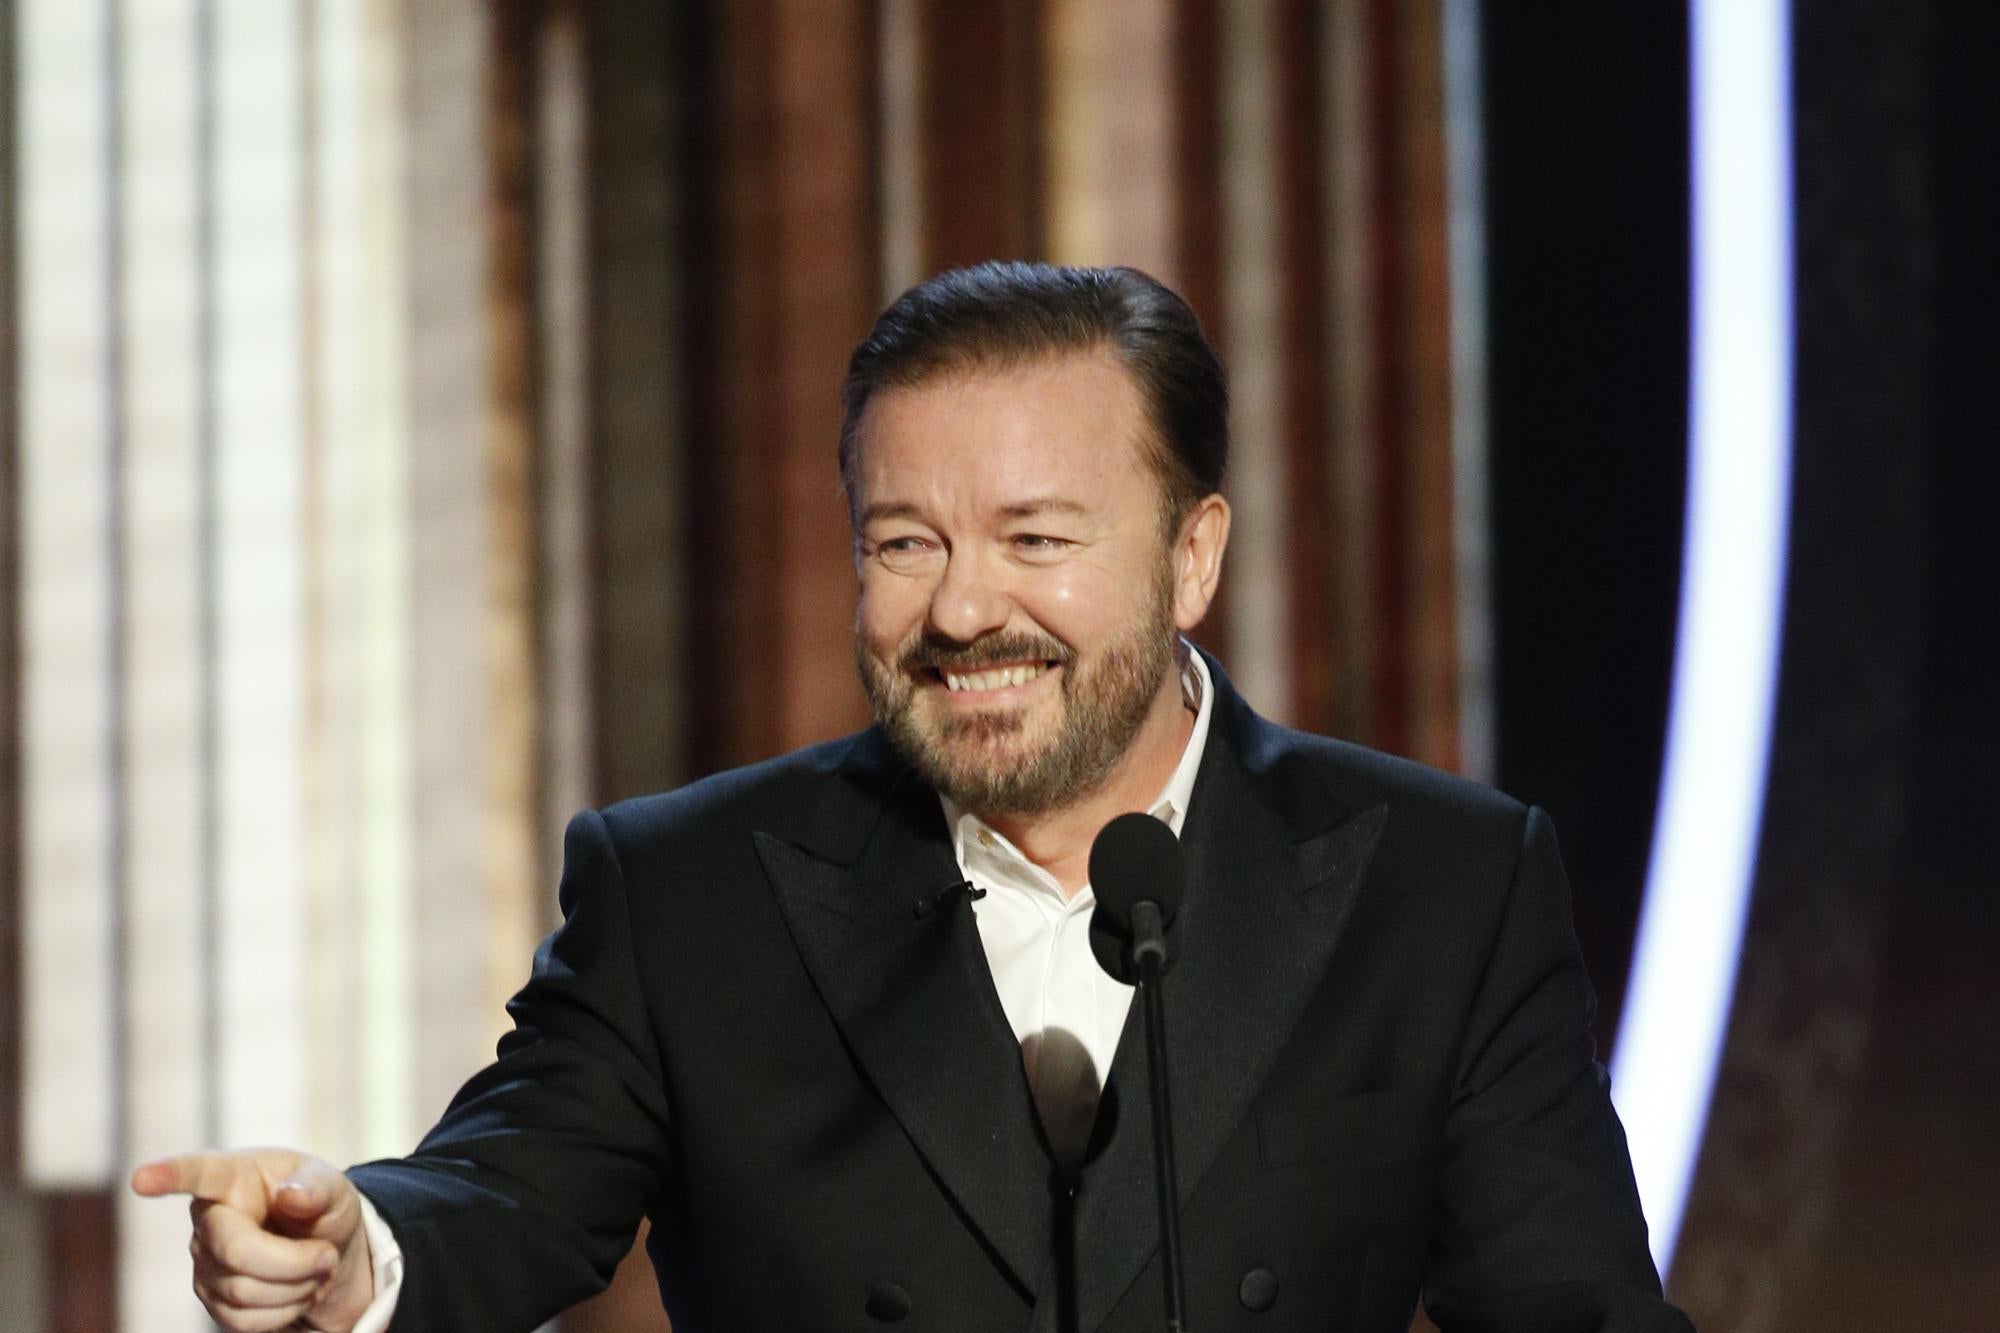 Gervais, standing at a podium, grins and points with his right hand.